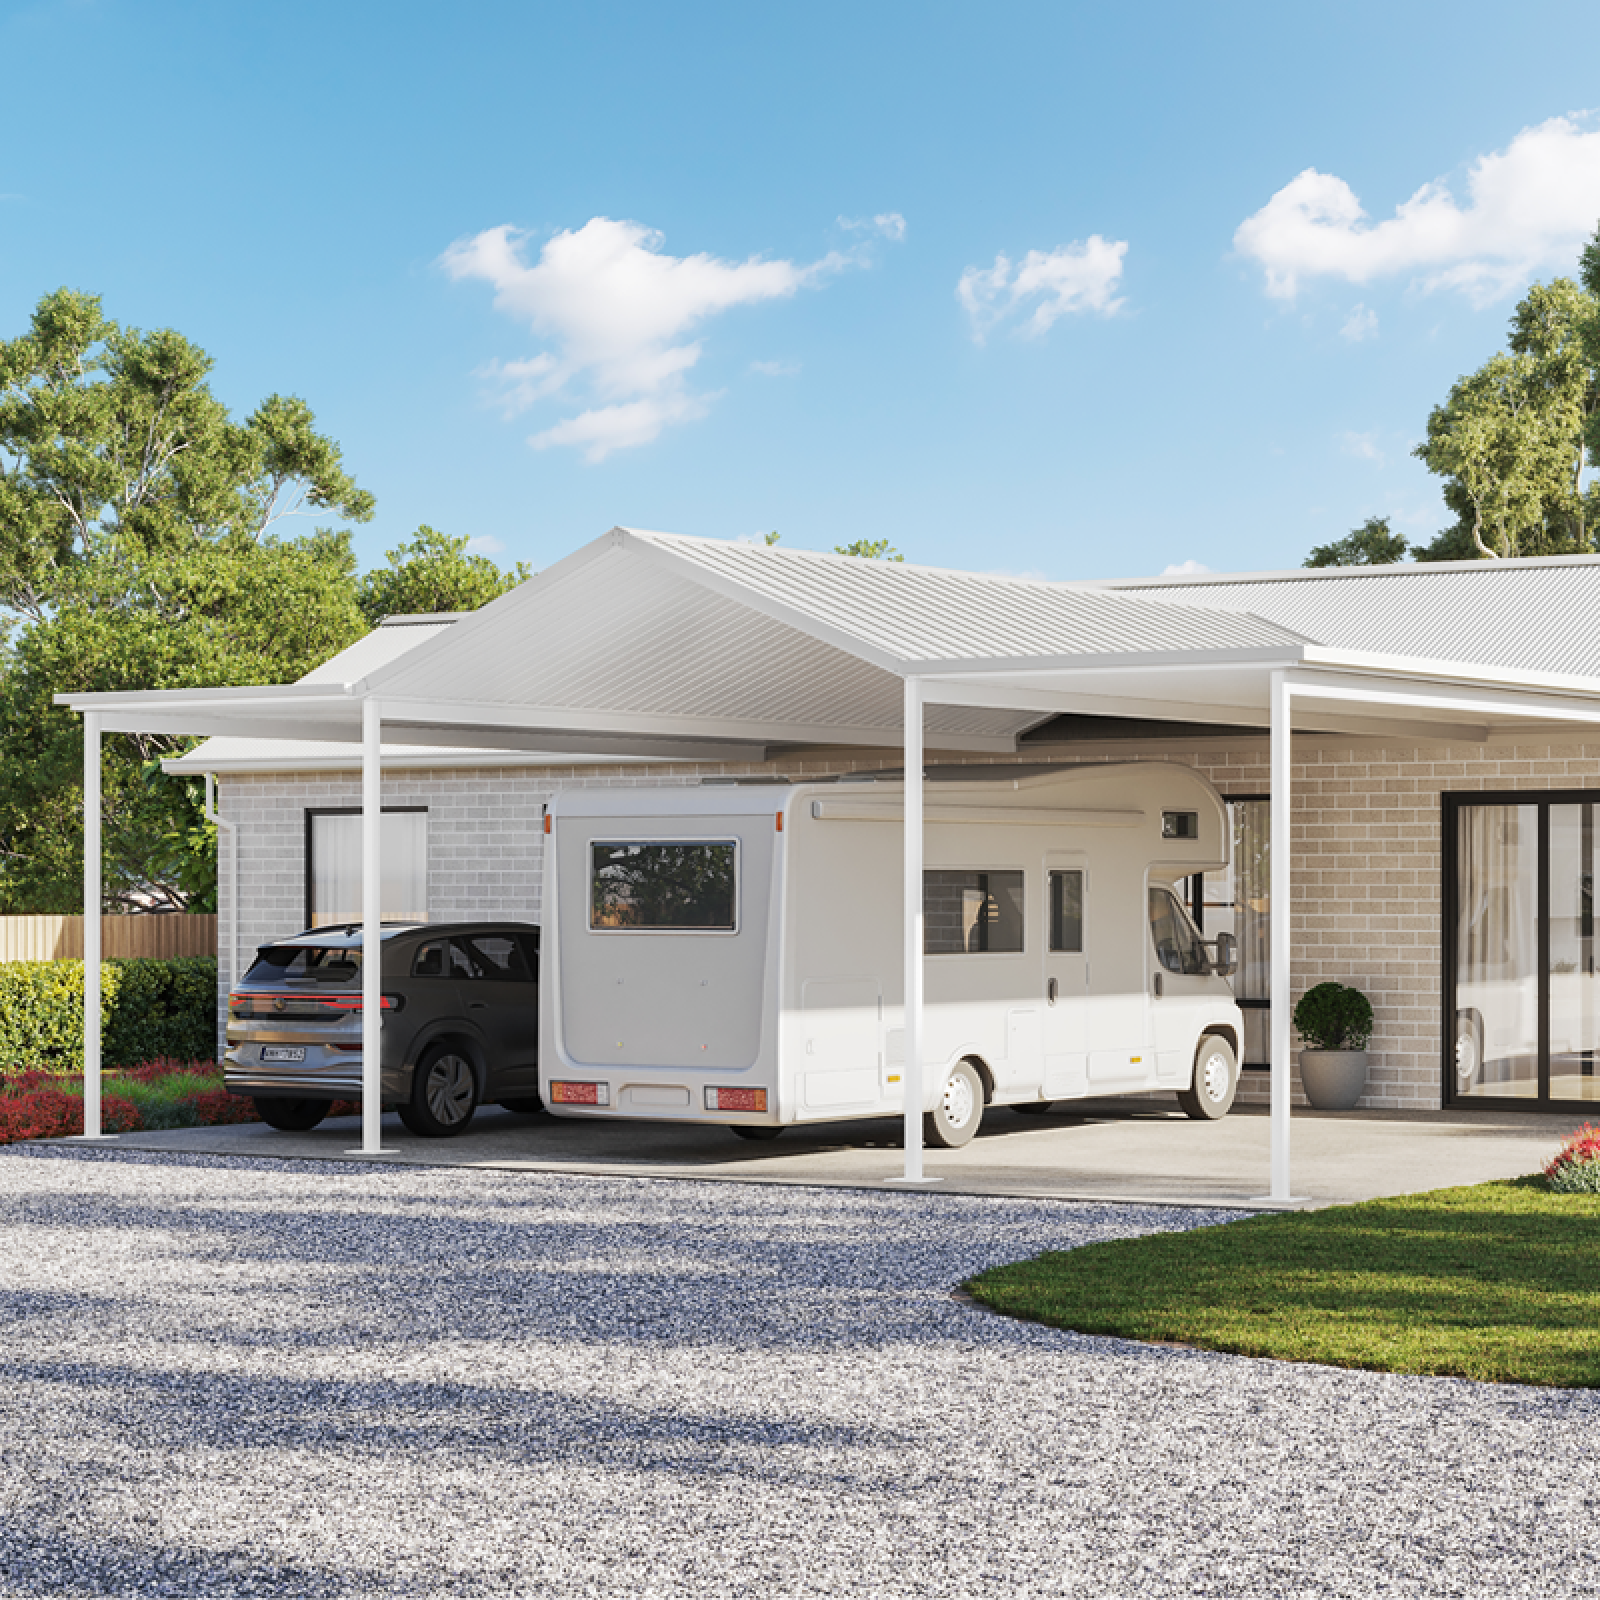 Combination carport with RV and car parked beneath